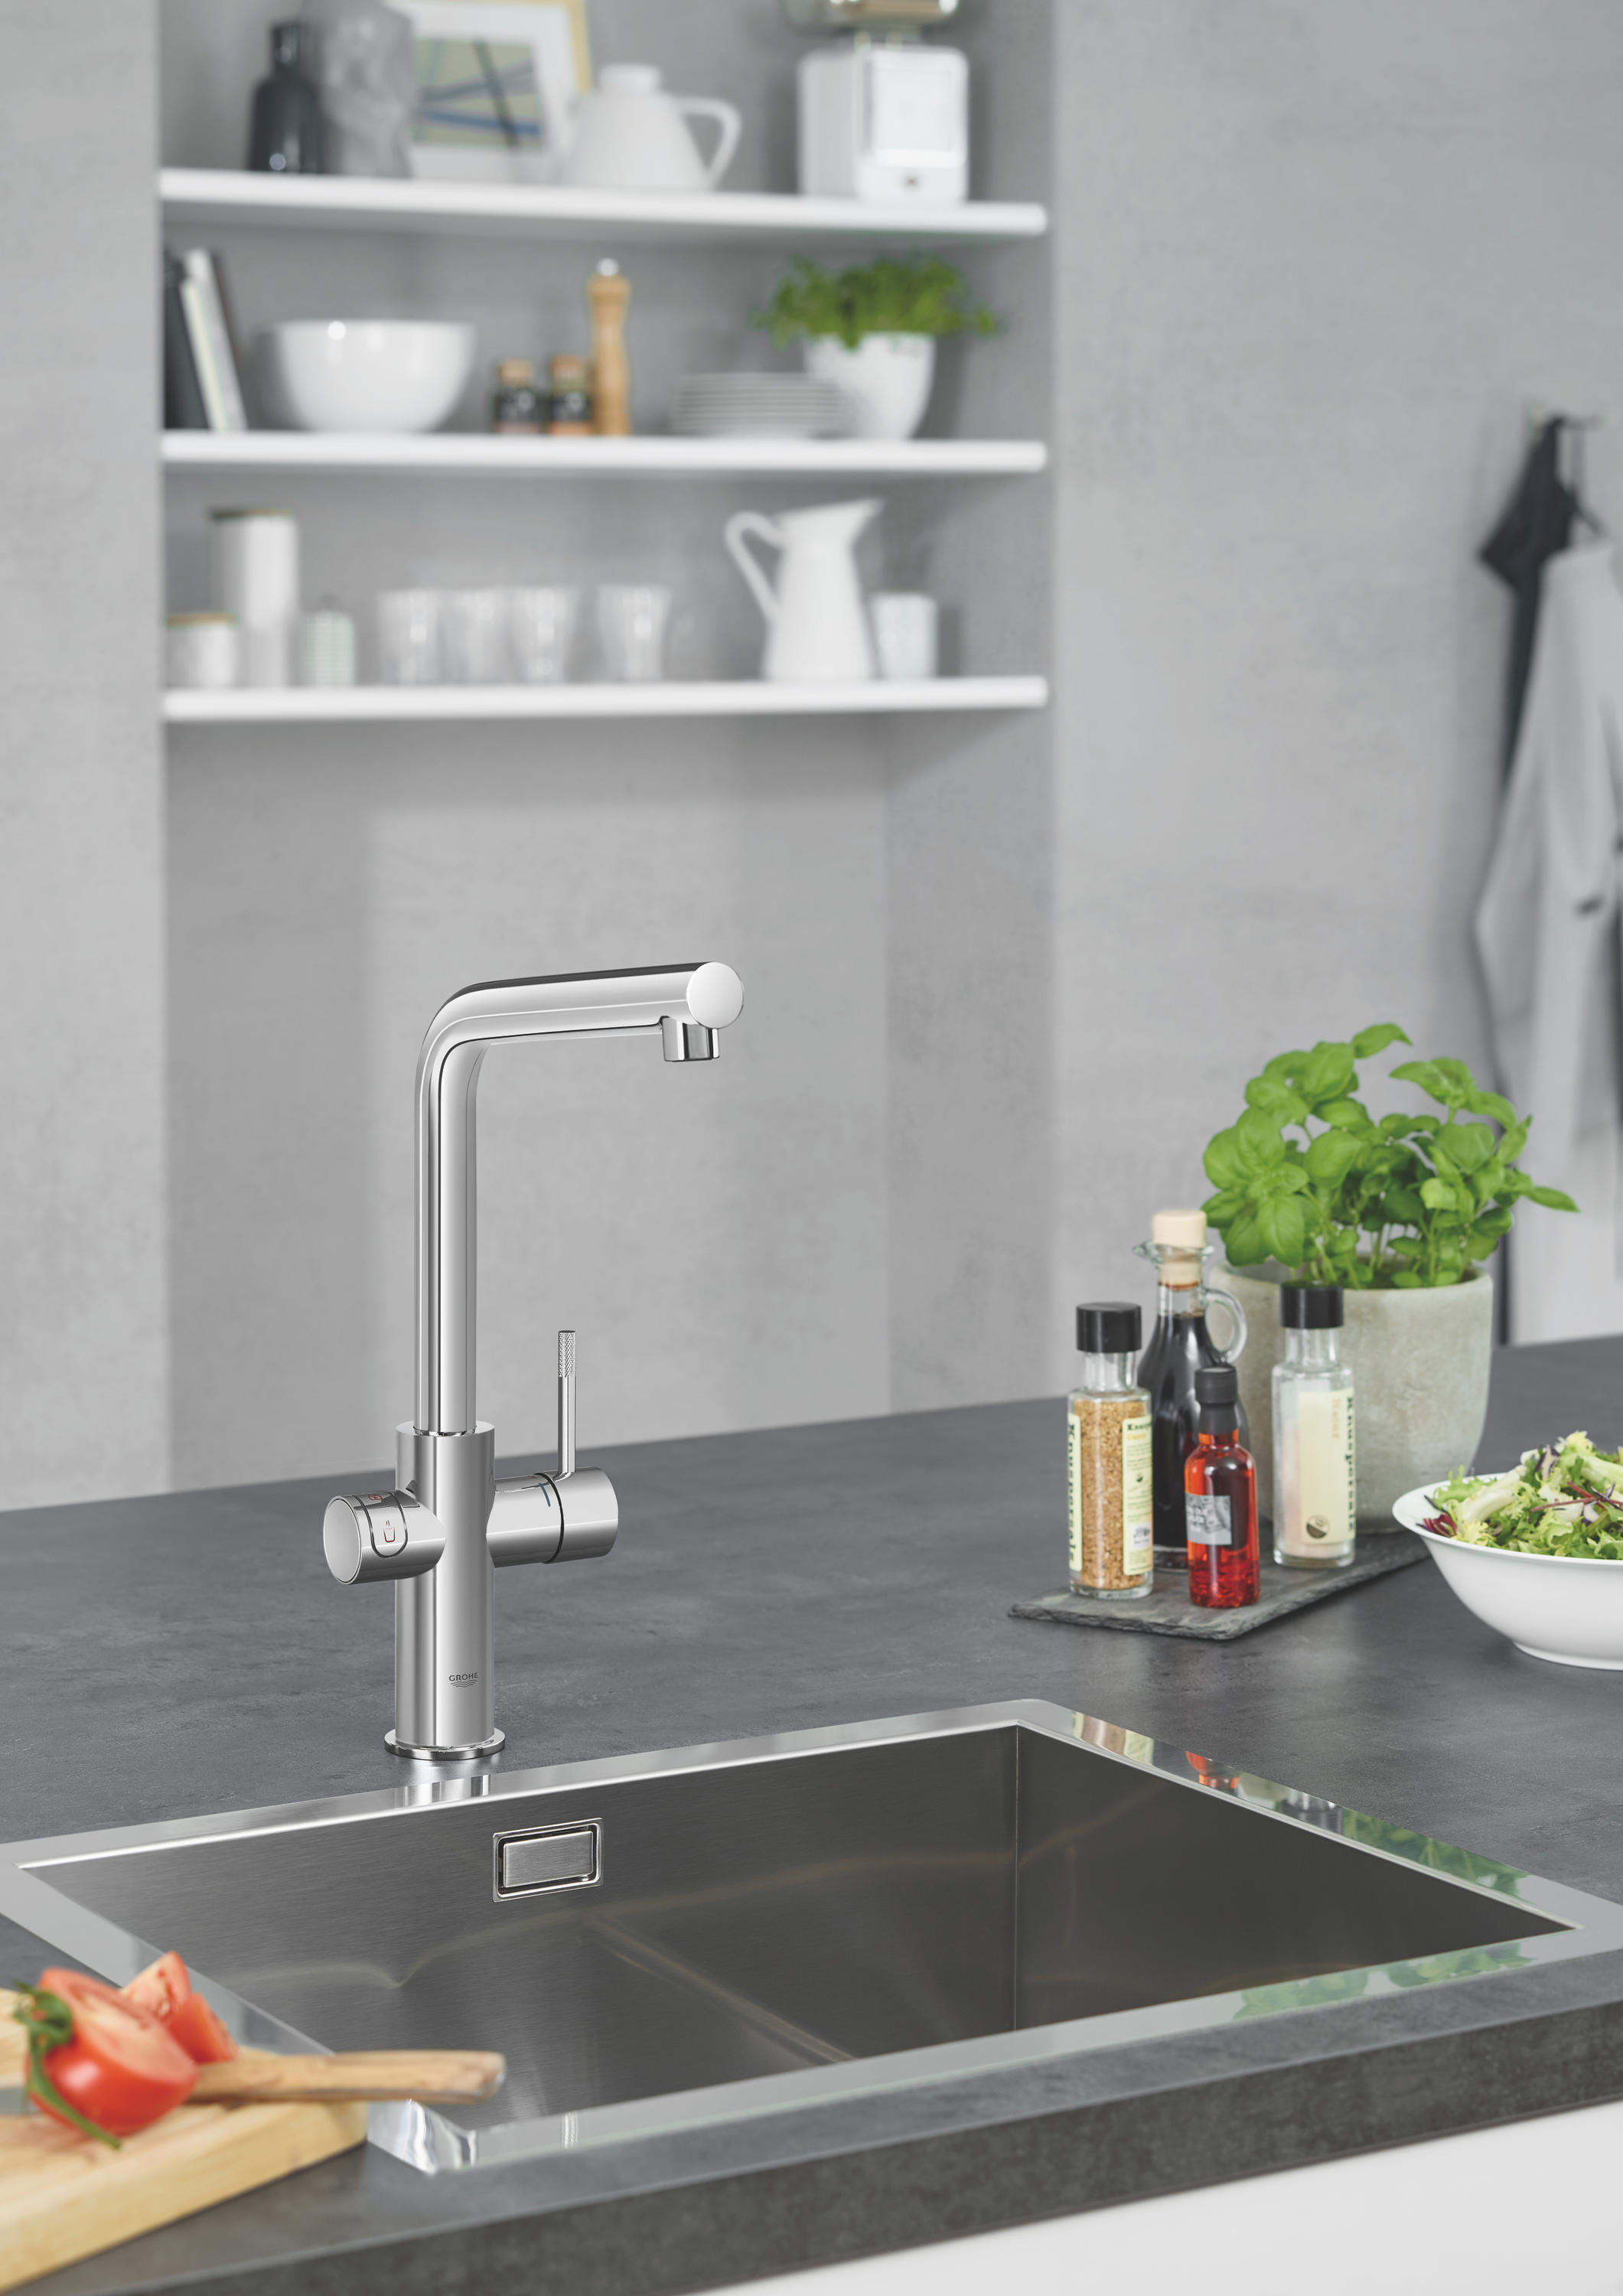 Red Duo Faucet and size boiler | Architonic